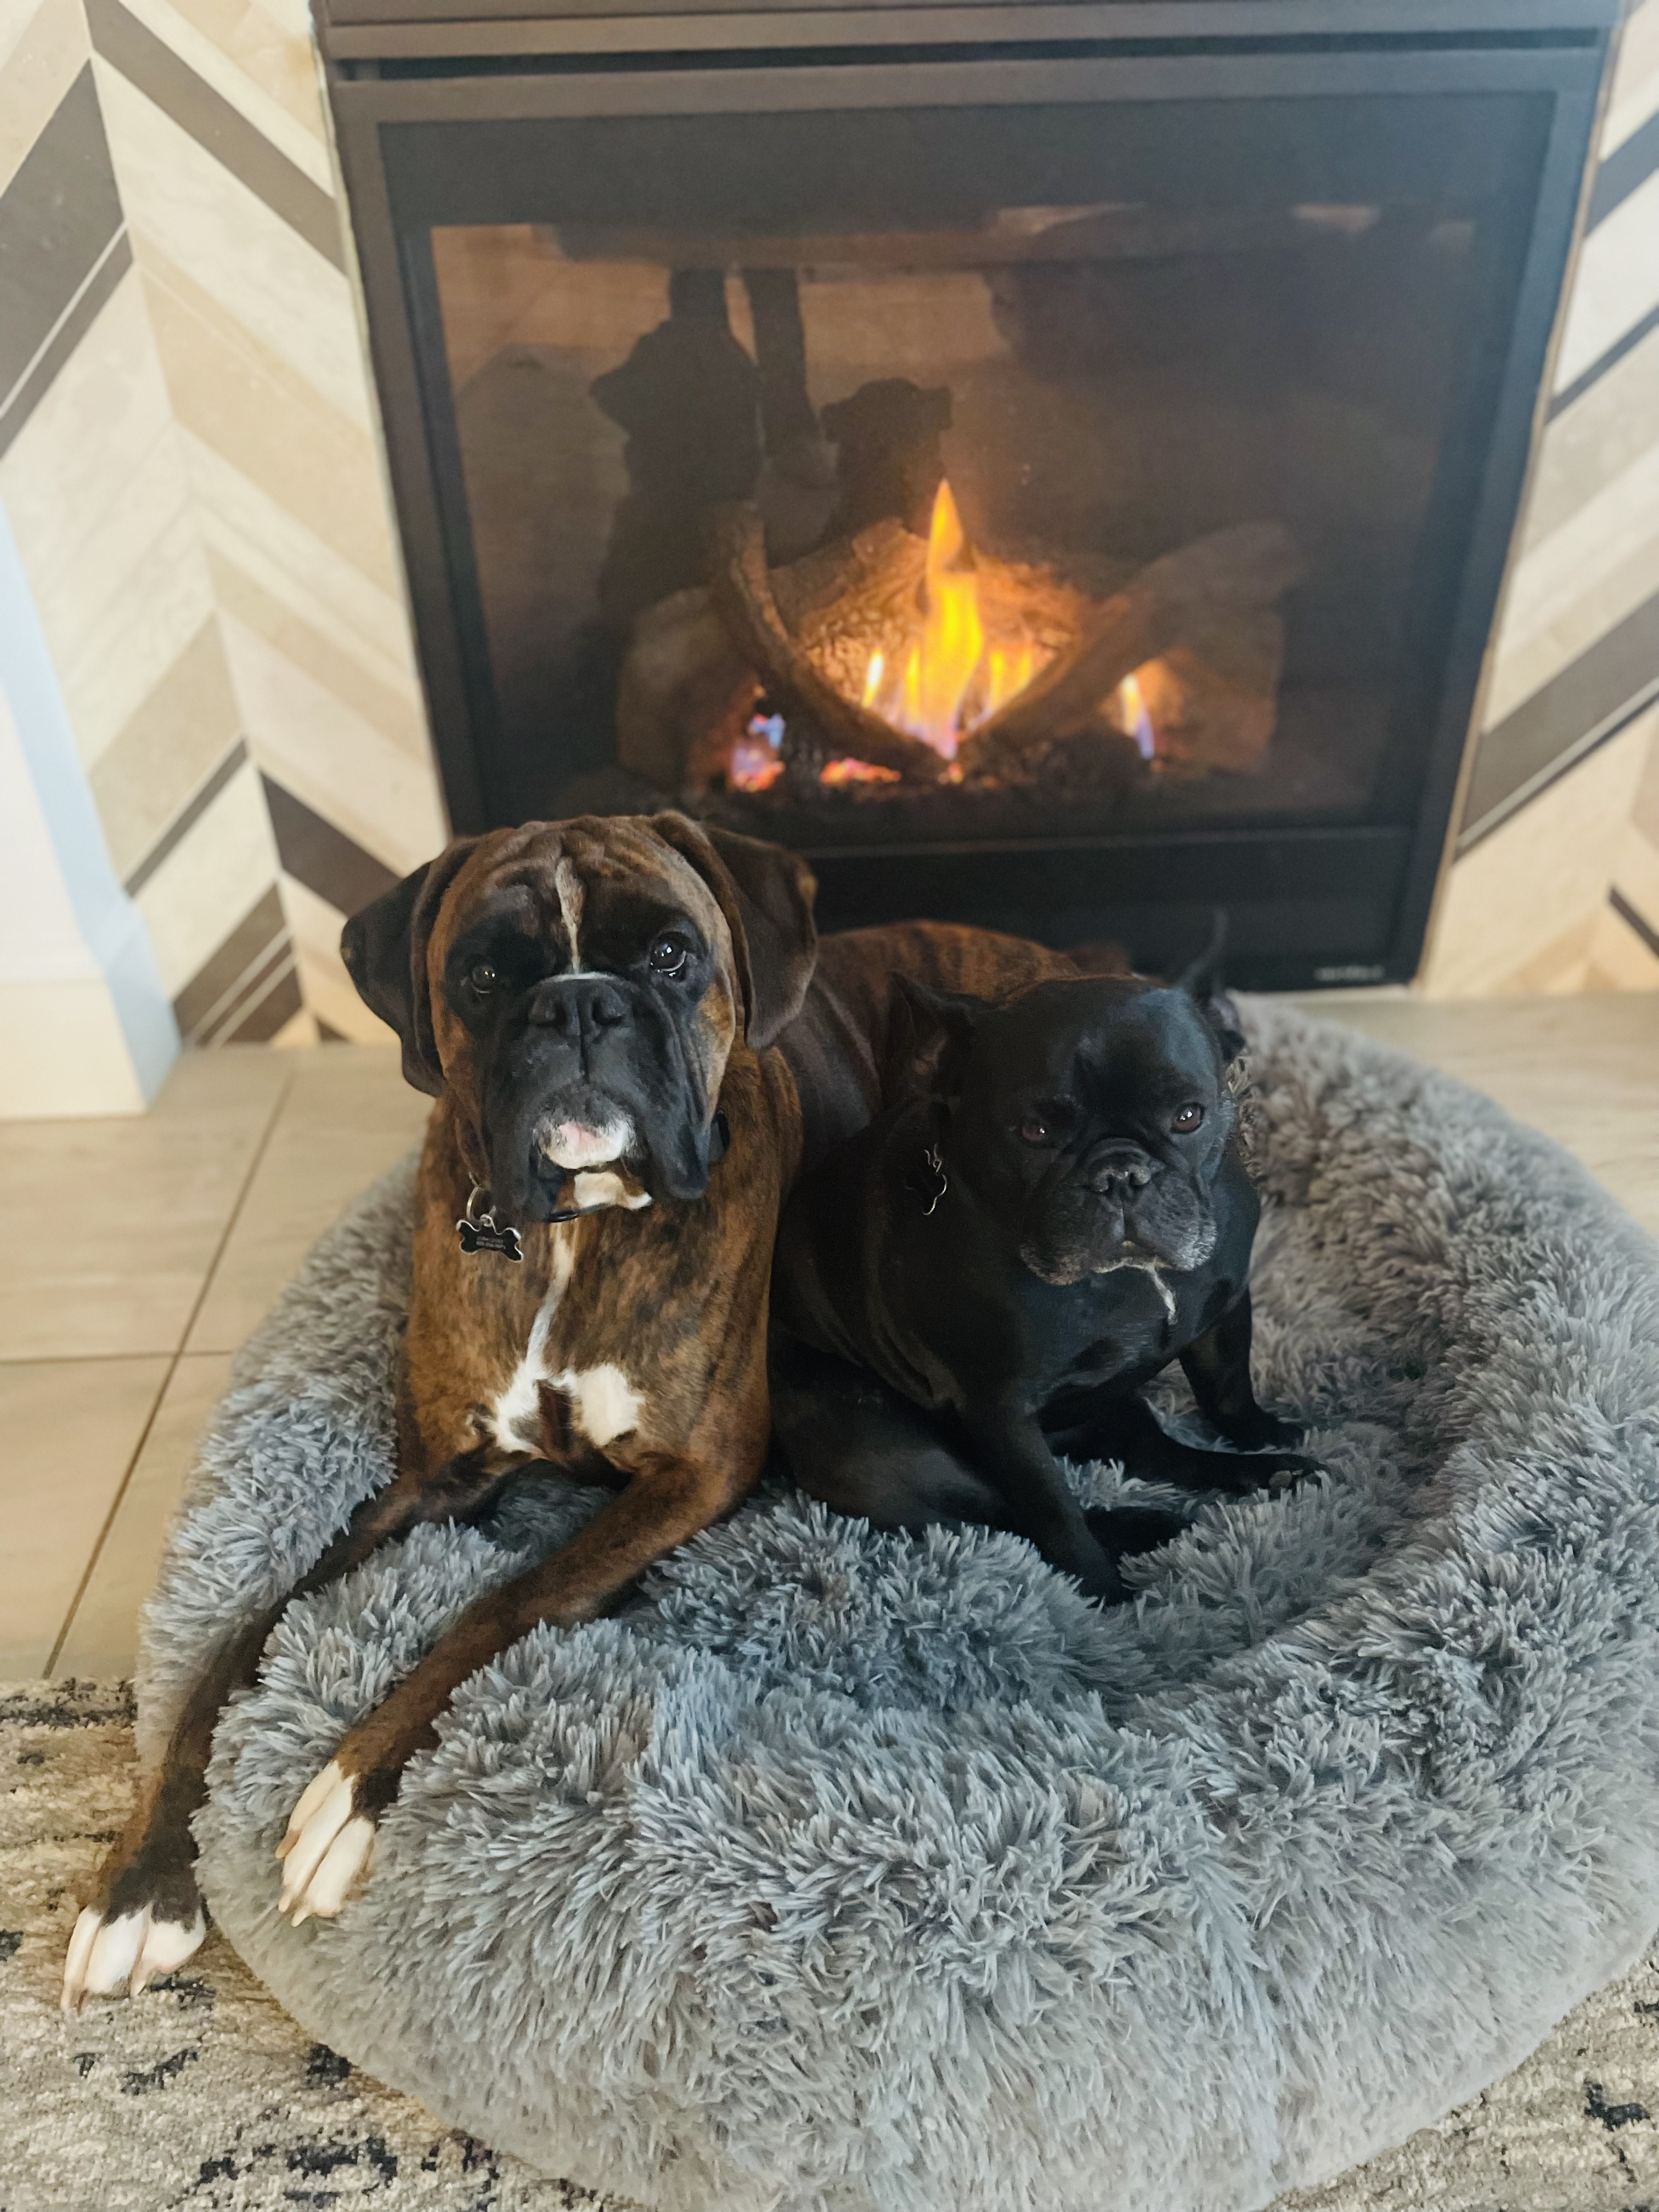 Two dogs laying on a rug in front of a fireplace.